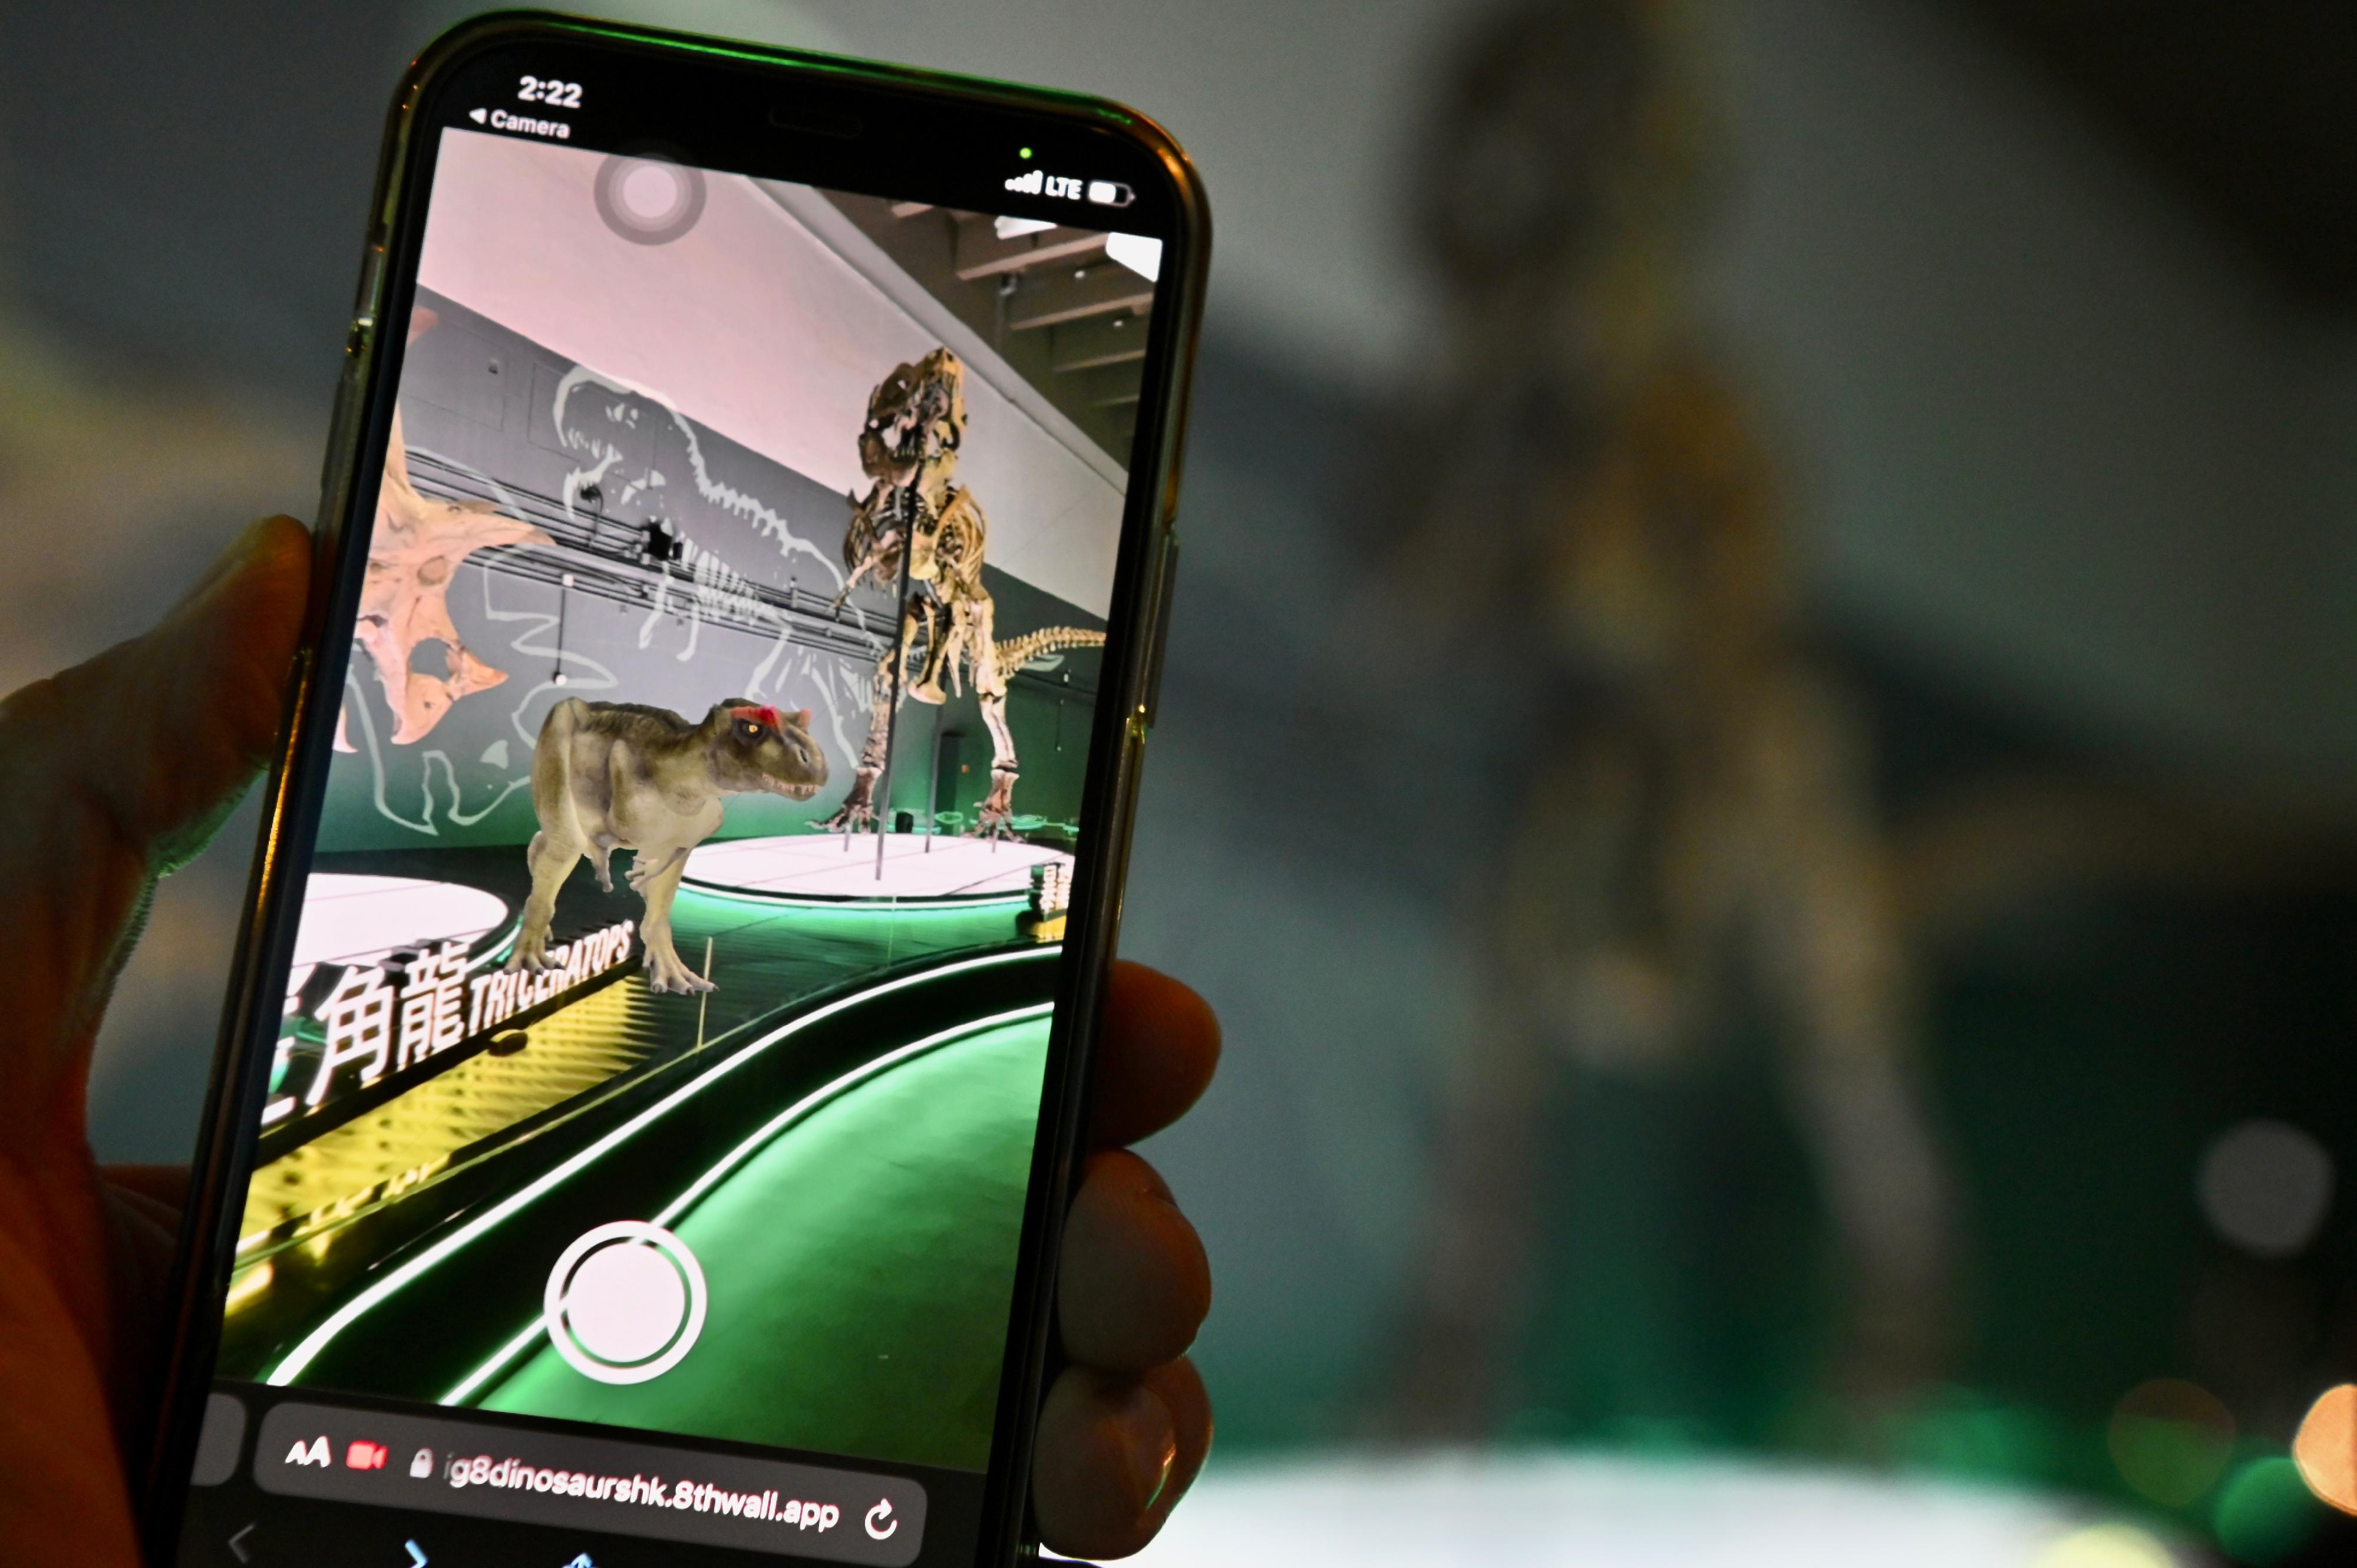 The Hong Kong Science Museum will stage a large-scale dinosaur exhibition, "The Hong Kong Jockey Club Series: The Big Eight - Dinosaur Revelation", from July 8 (Friday). Picture shows a visitor using augmented reality technology to interact with various dinosaurs through a smartphone.